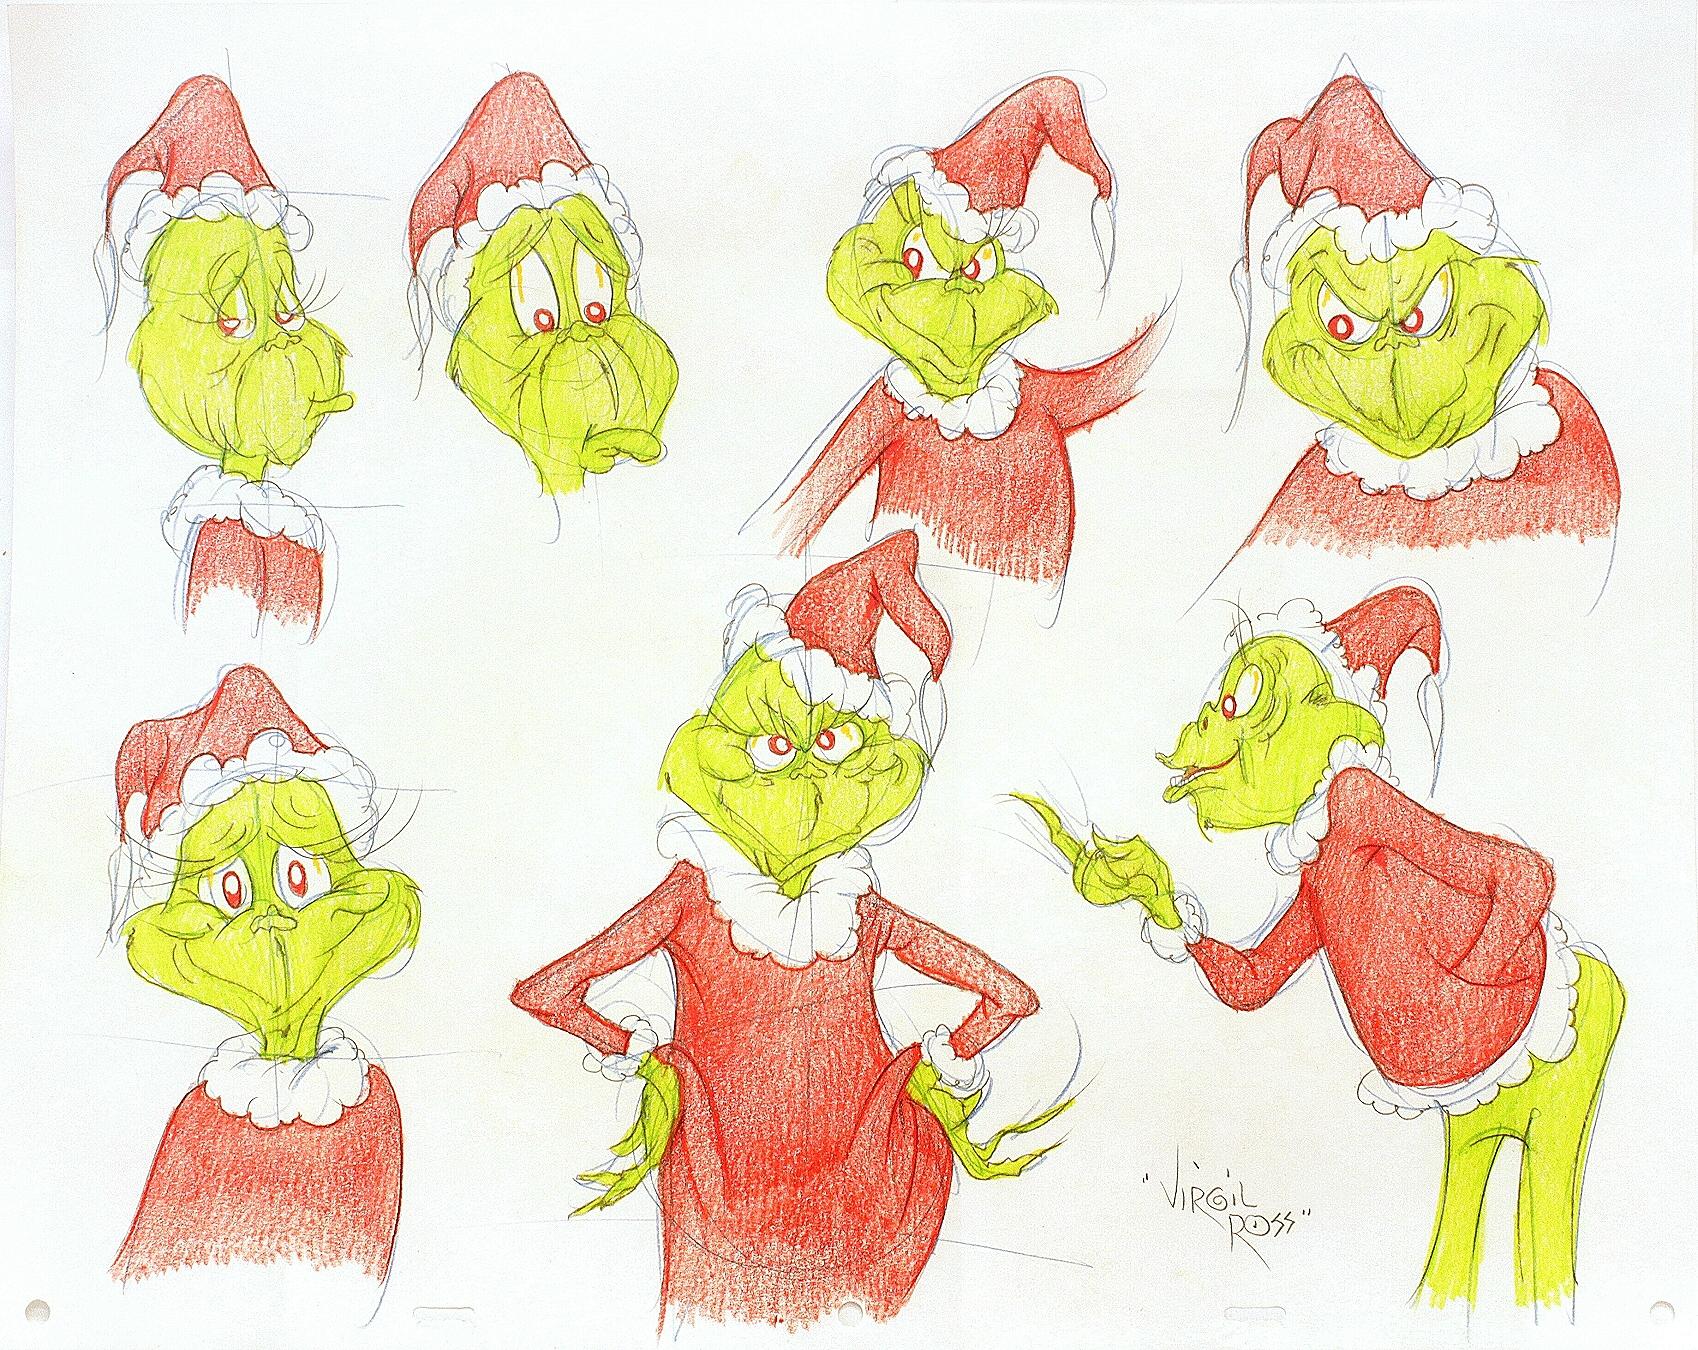 American How the Grinch Stole Christmas, Seven Original Drawings Signed by Virgil Ross